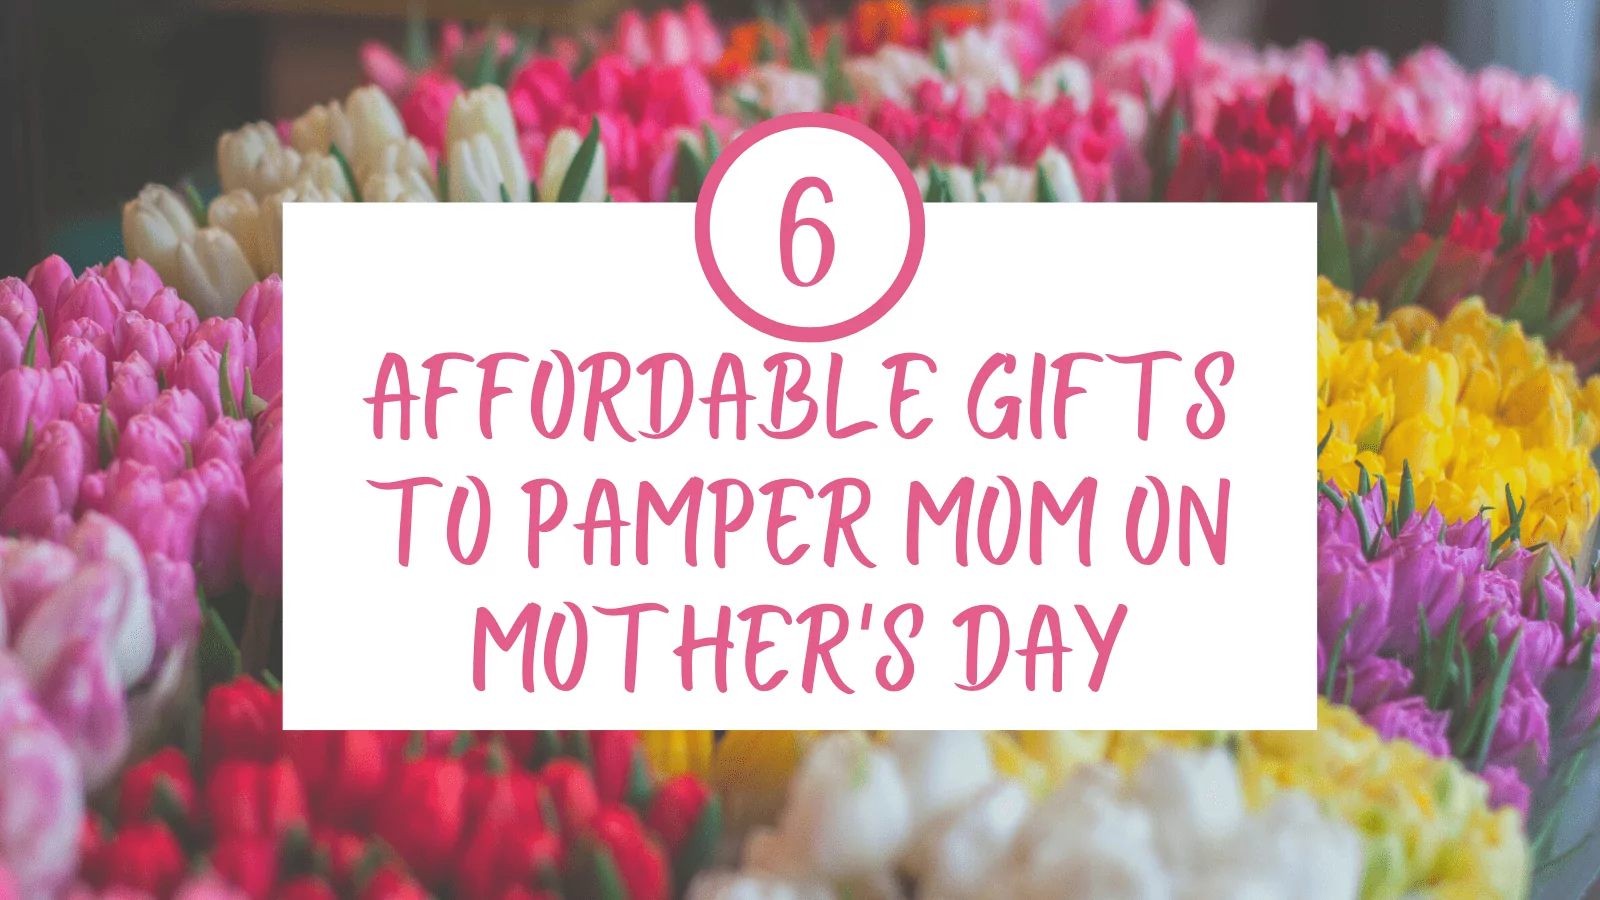 Pamper mom on mother's day